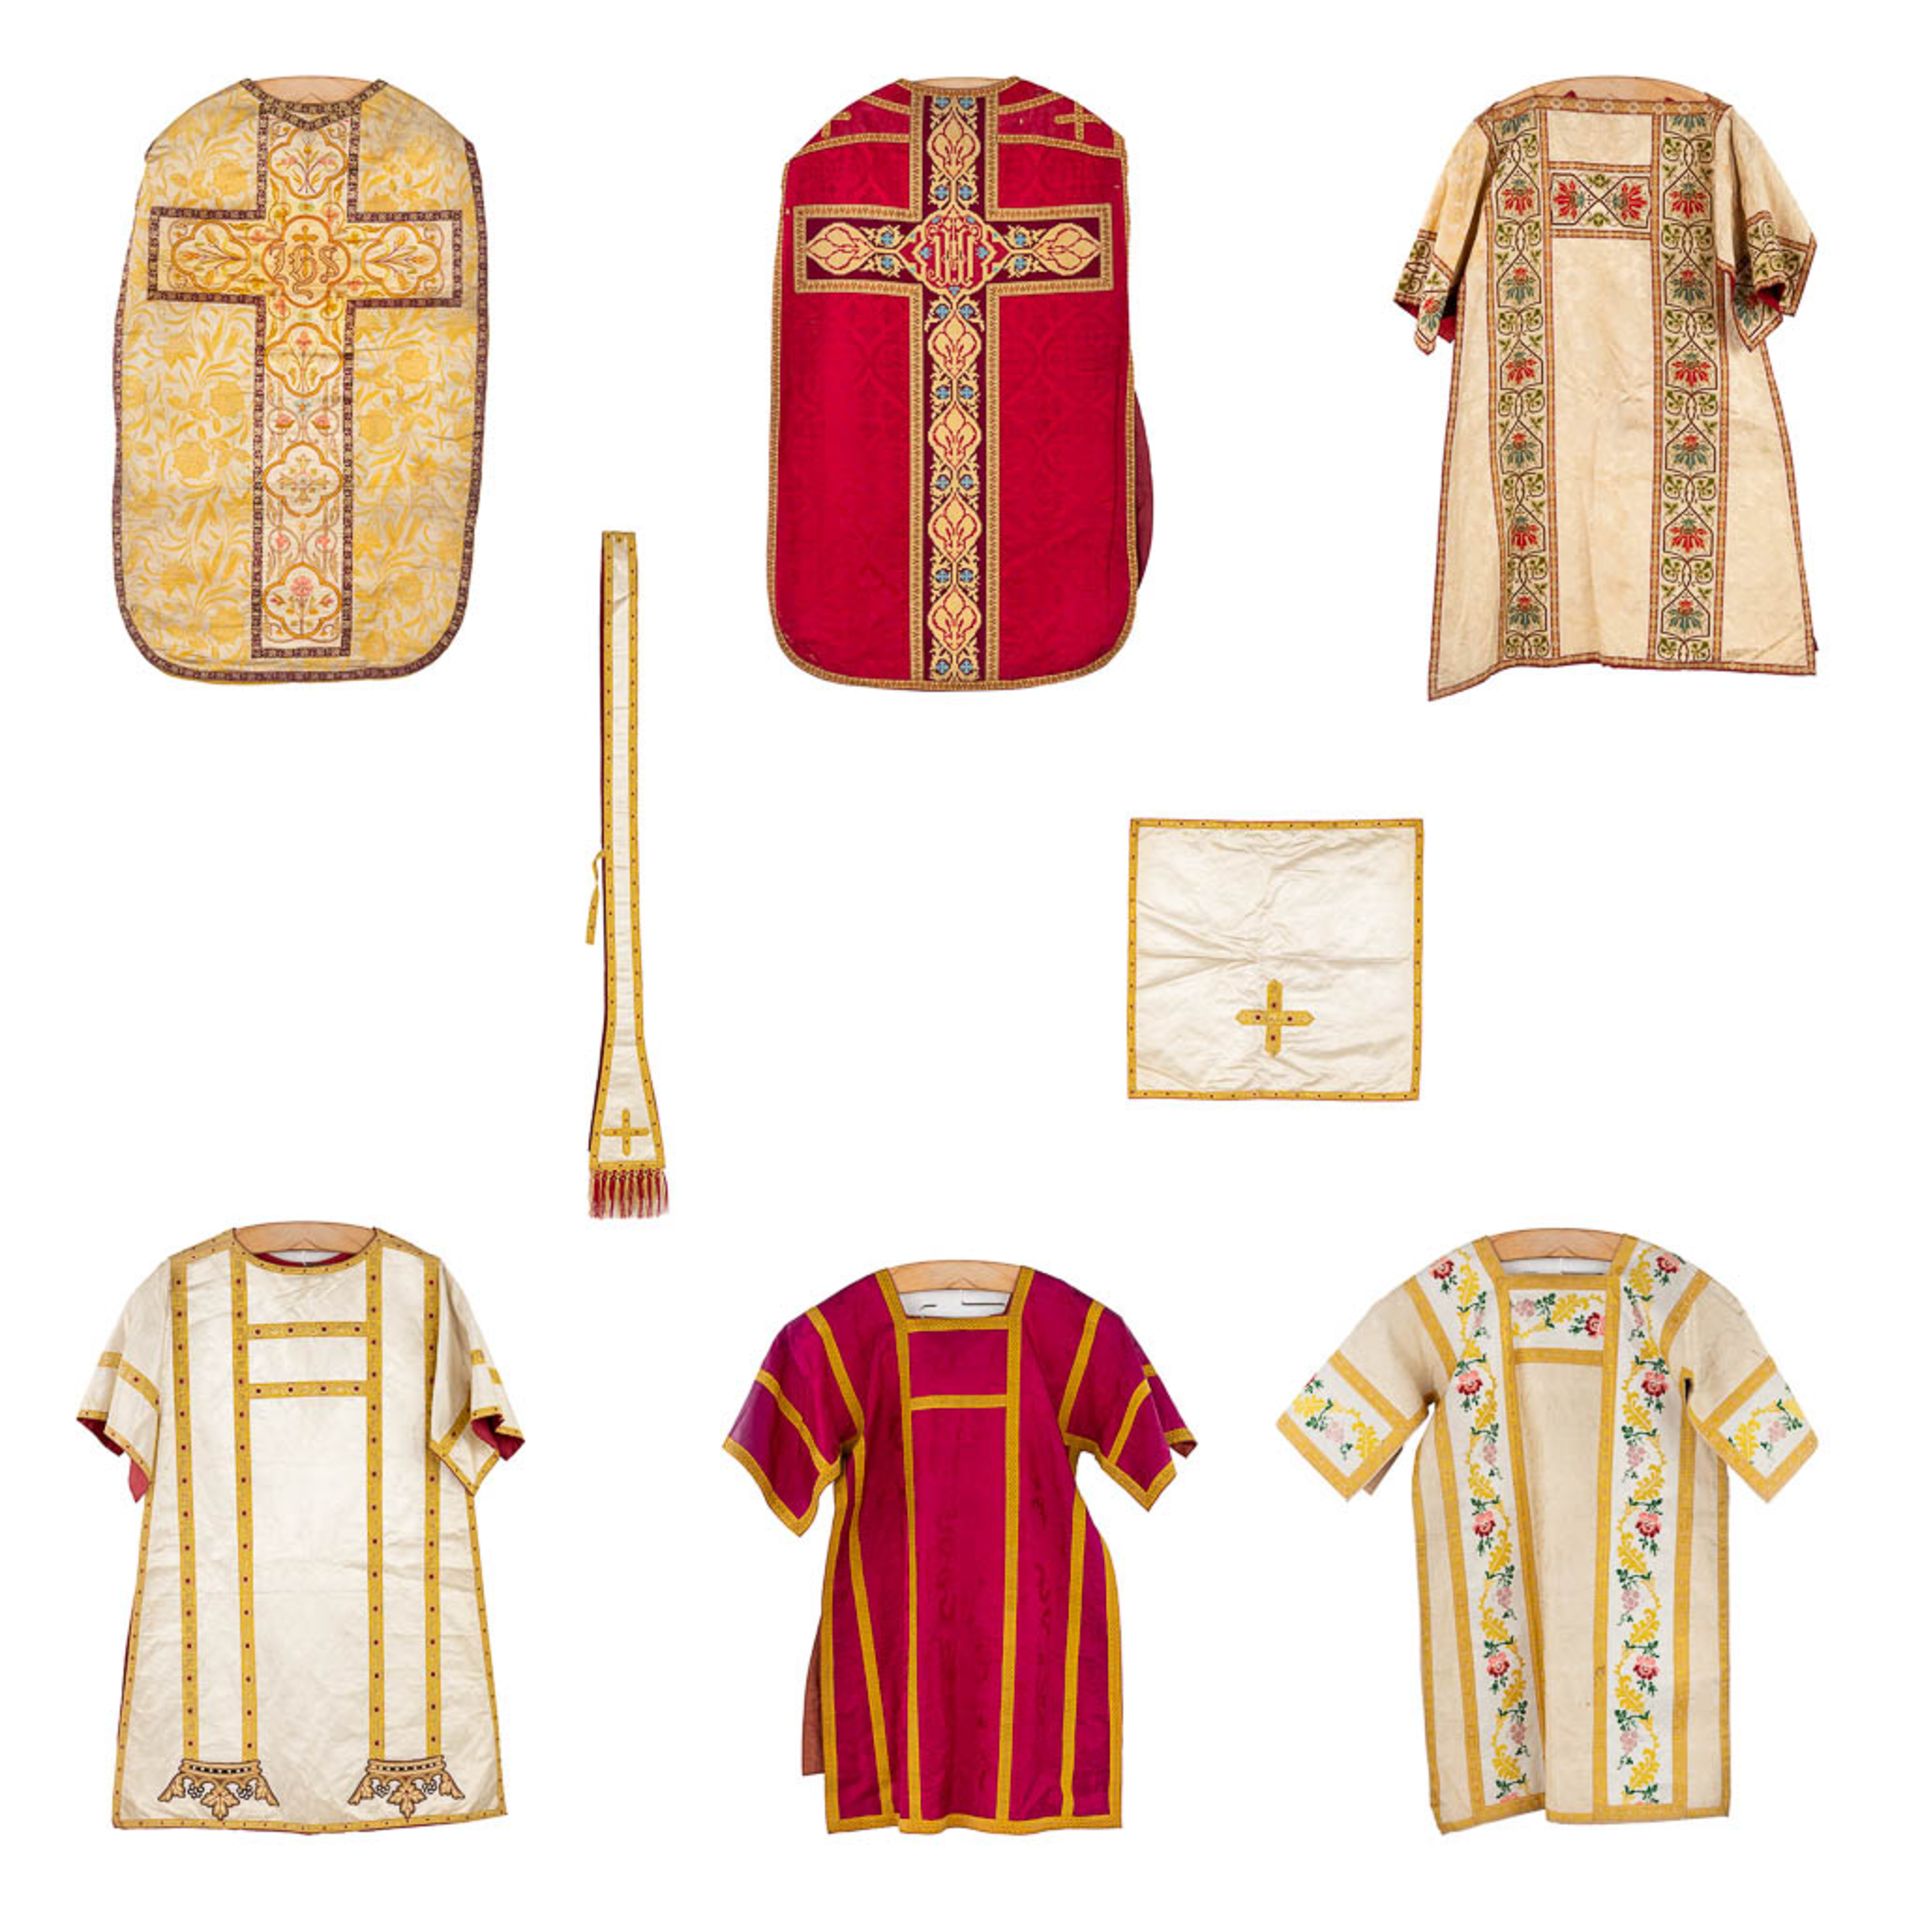 Four Dalmatics, Two Roman Chasubles, A stola and Chalice Veil, finished with embroideries.